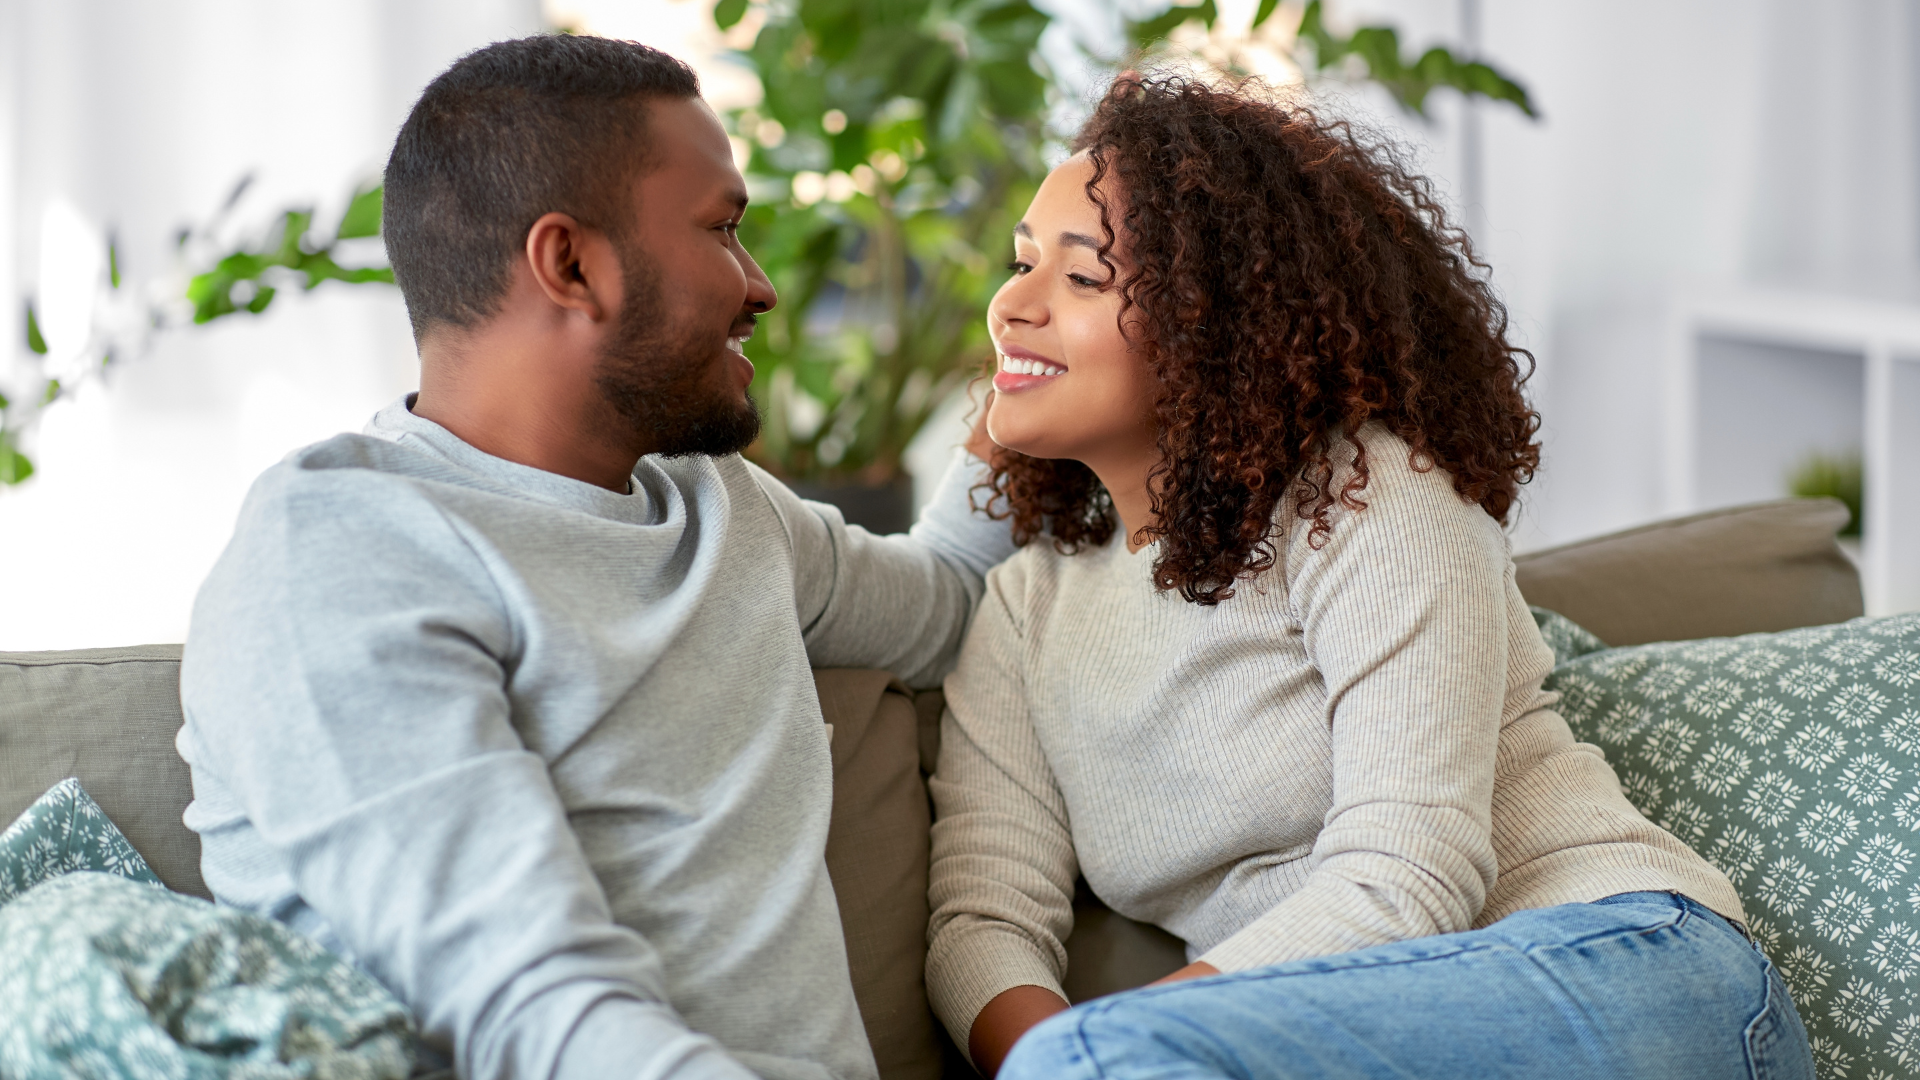 Get Serious with These 10 Relationship Questions